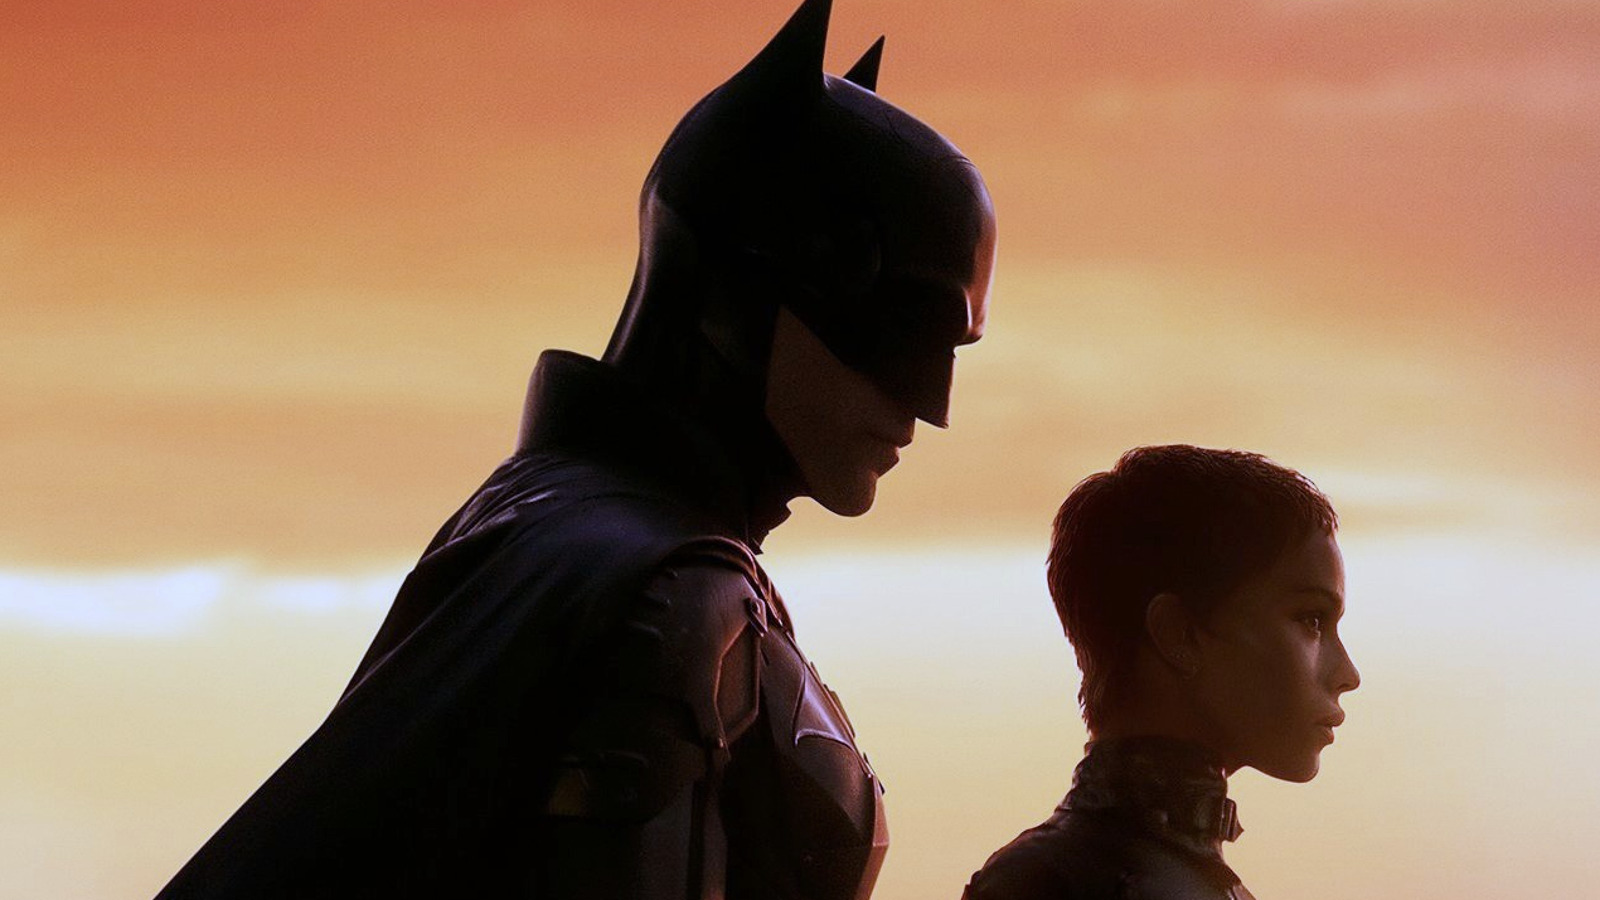 Movies Like The Batman You'll Definitely Want To Watch